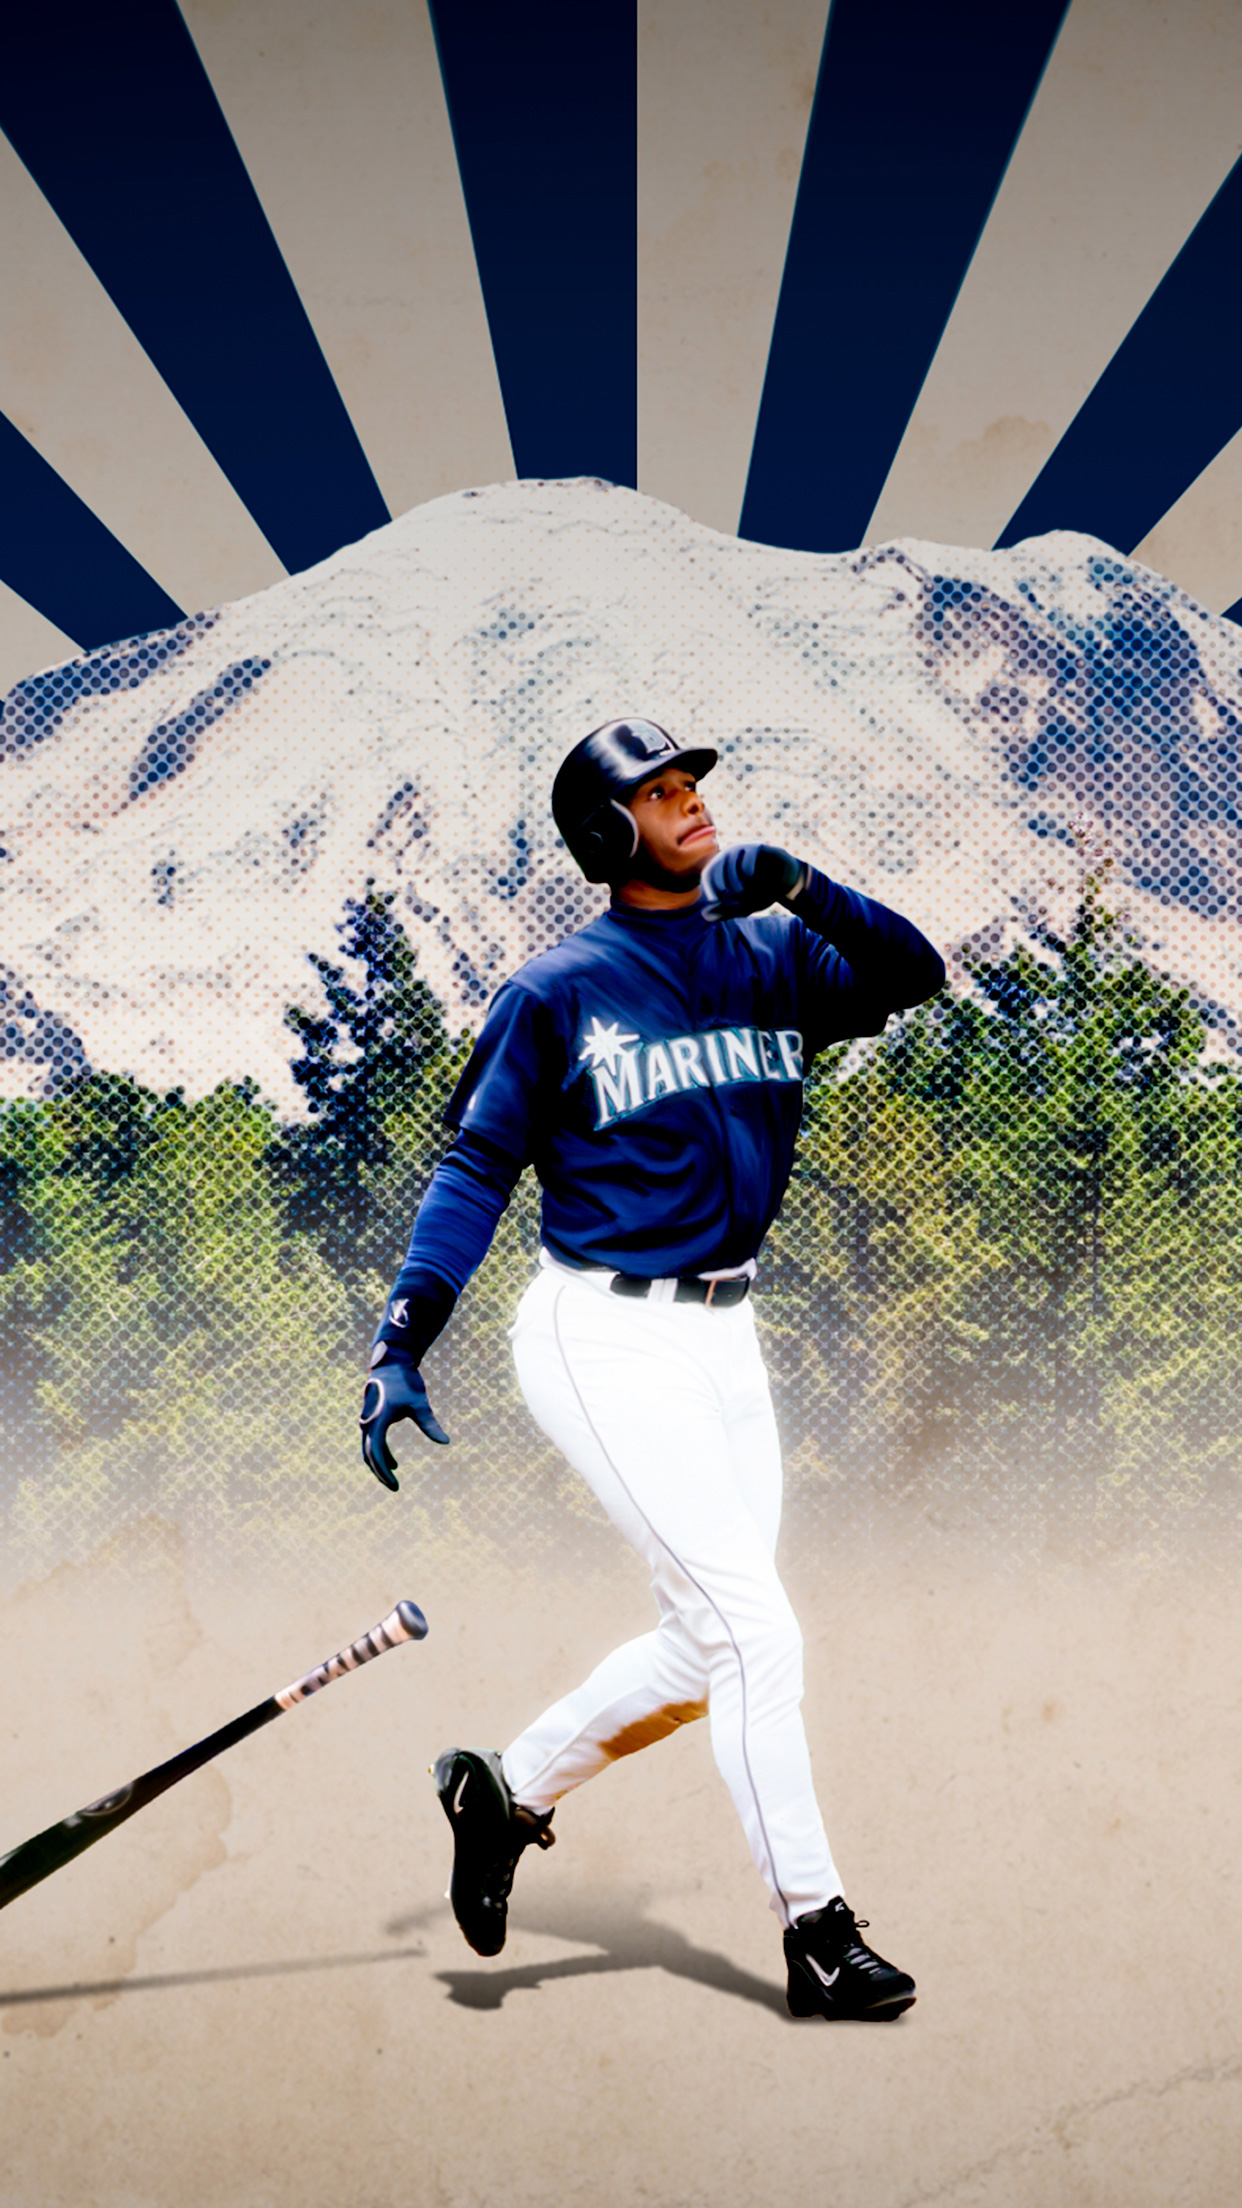 Mariners Players Wallpaper Seattle